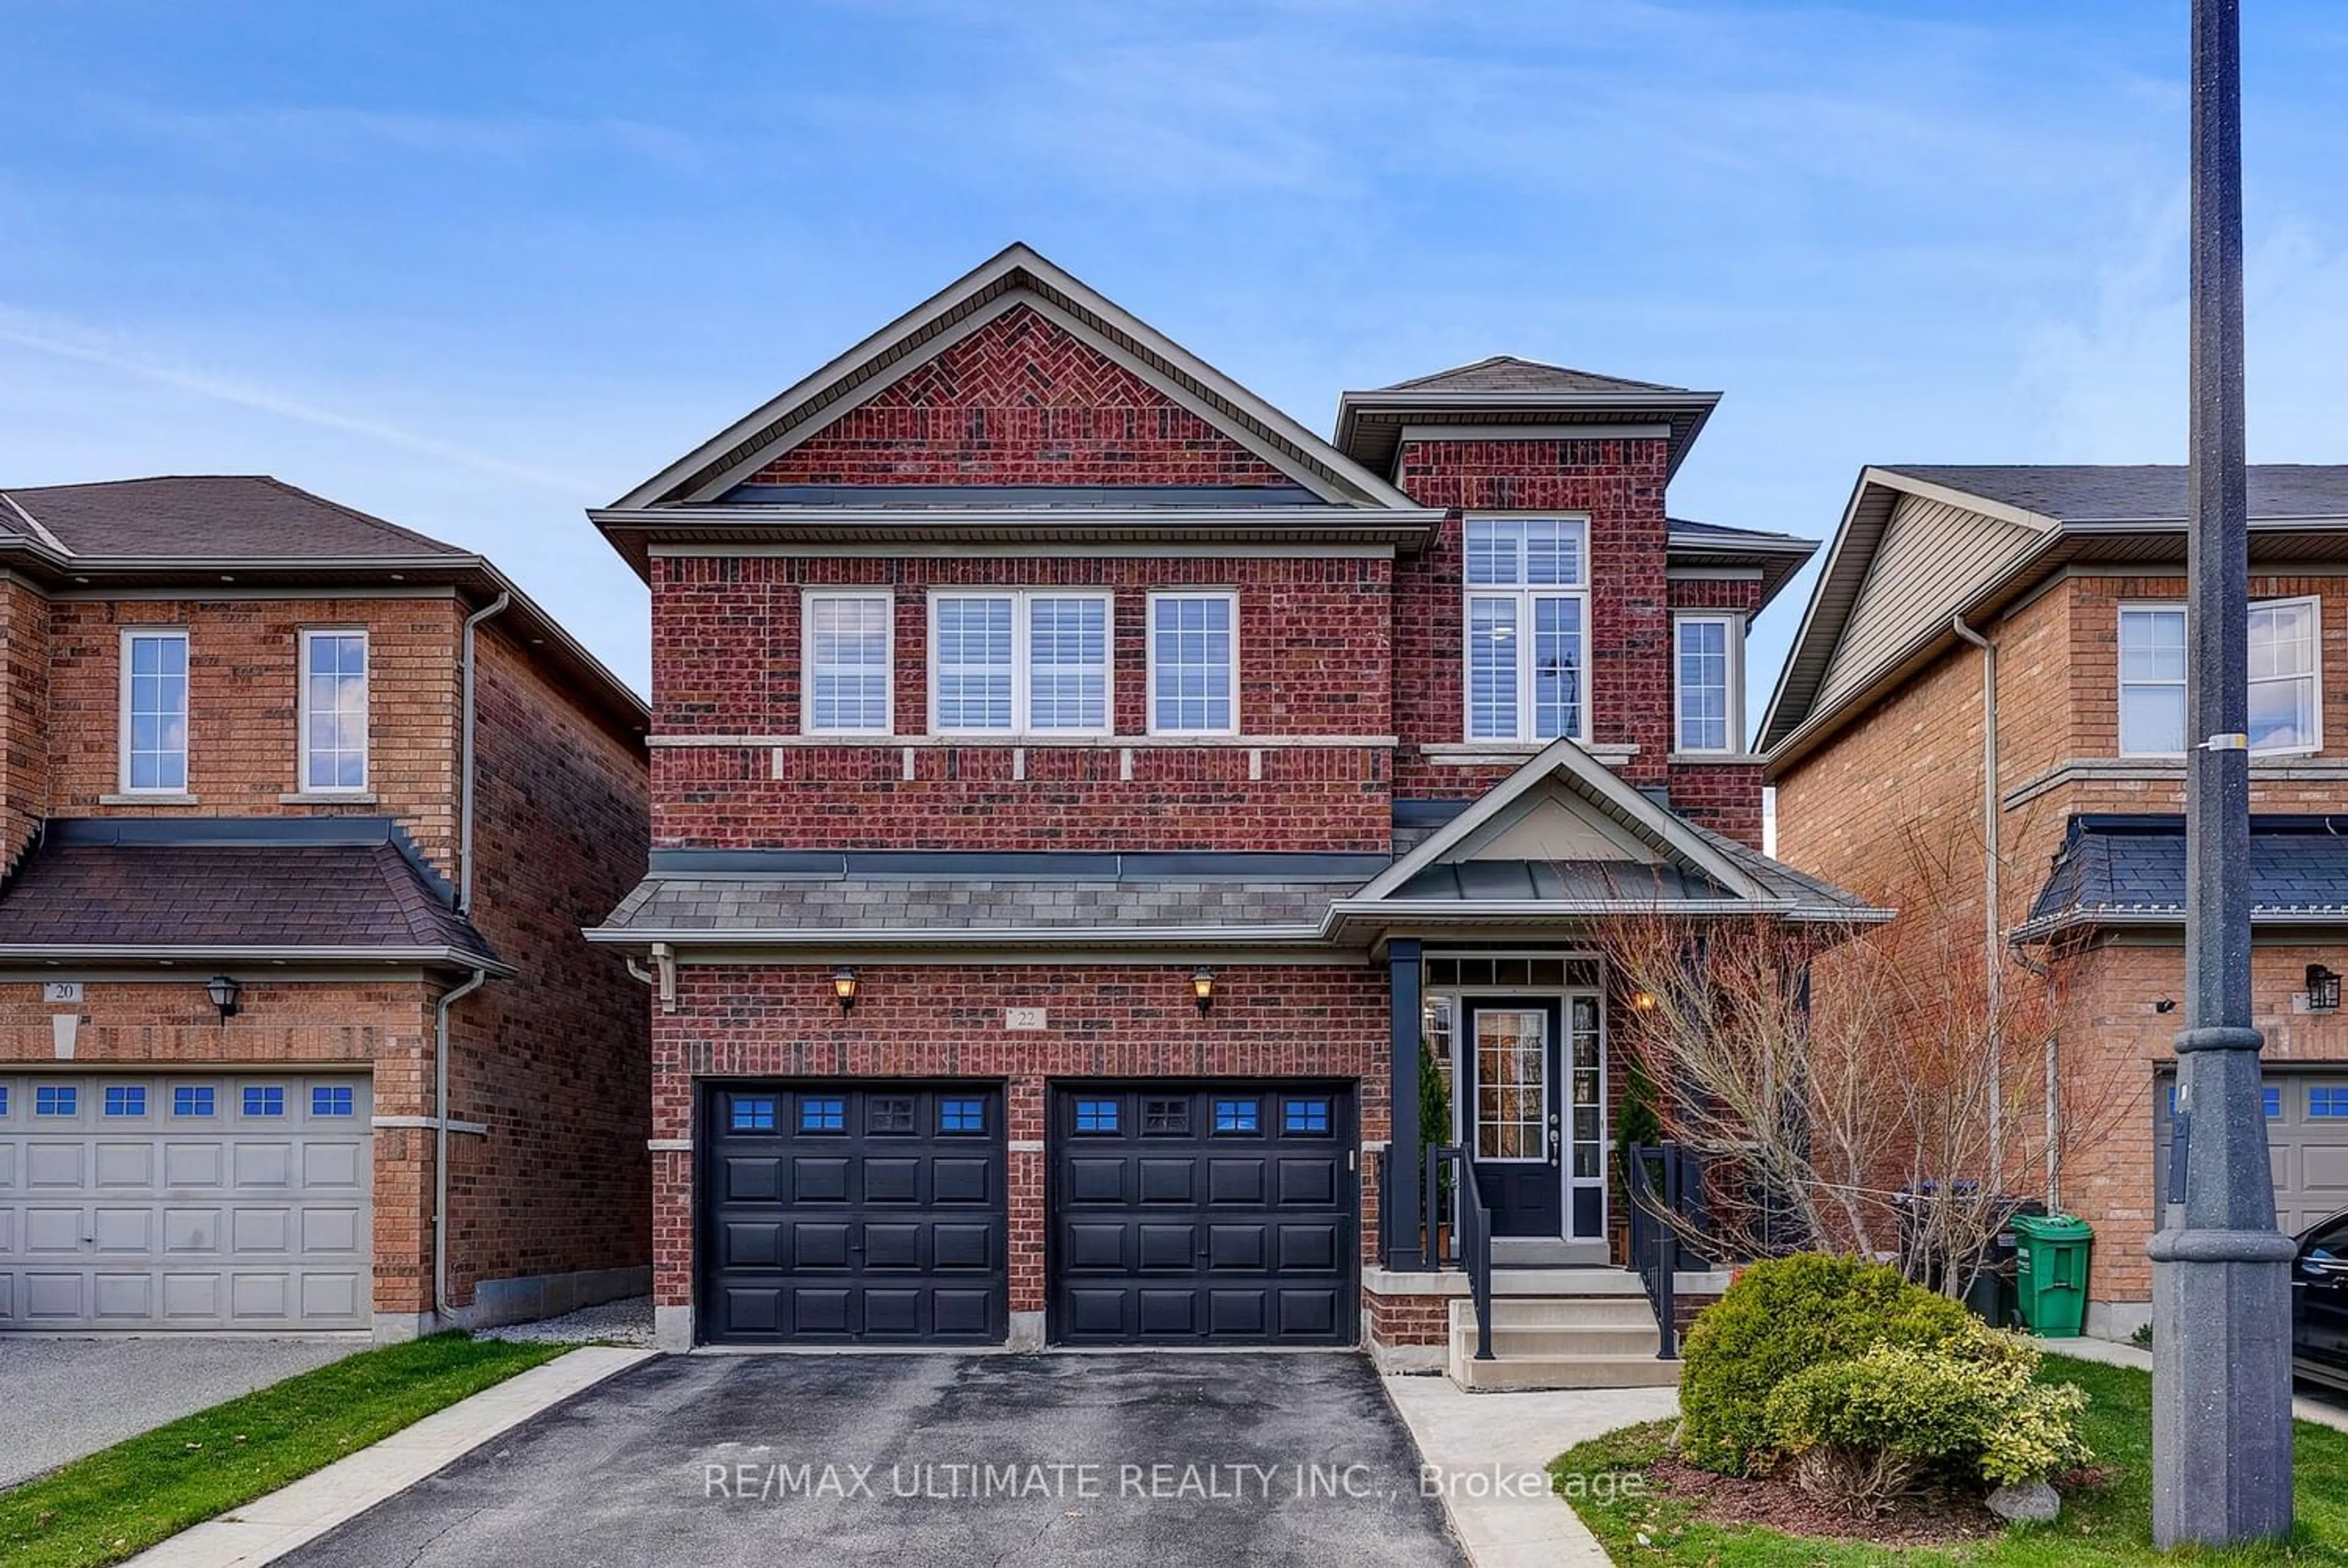 Home with brick exterior material for 22 Hybrid St, Brampton Ontario L7A 0L5